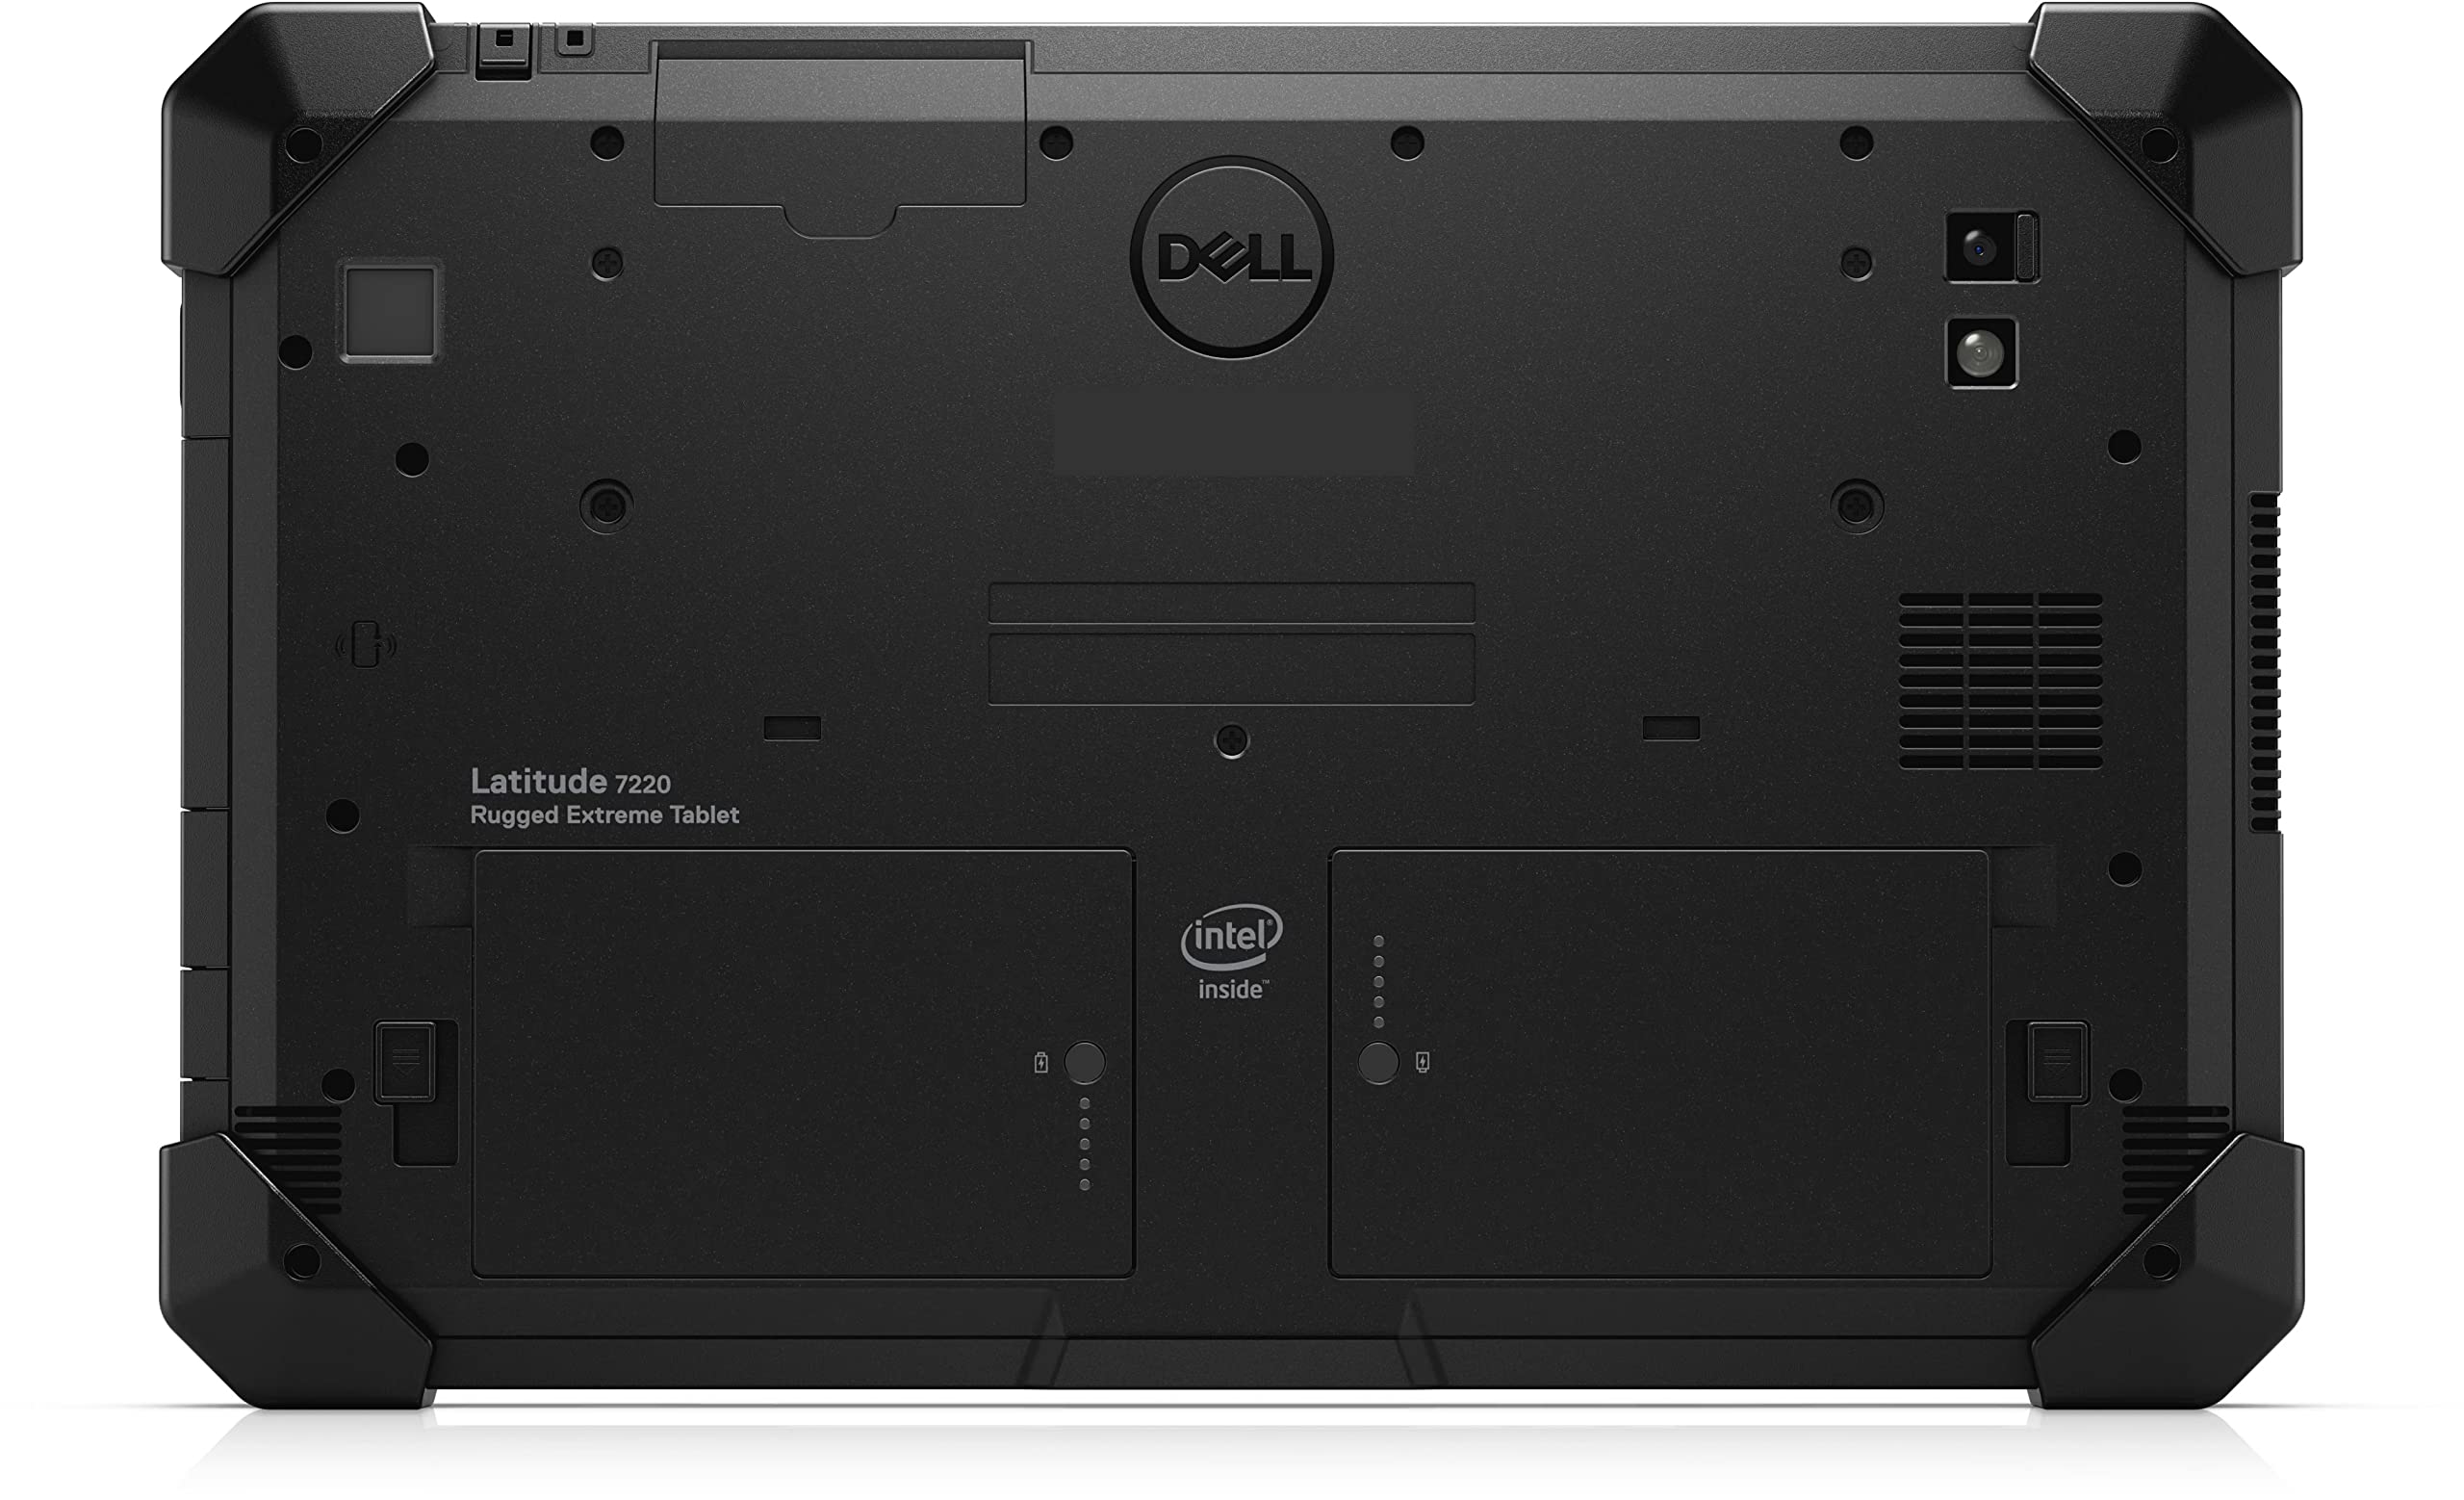 Dell Outlet Latitude 7220 Rugged Extreme Tablet PC, 11.6 inch FHD (1920 x 1080), Intel Core 8th Generation i7-8665U Processor, 16GB Ram, 256GB NVMe SSD, Type C, Webcam, Windows 11 Pro (Renewed)